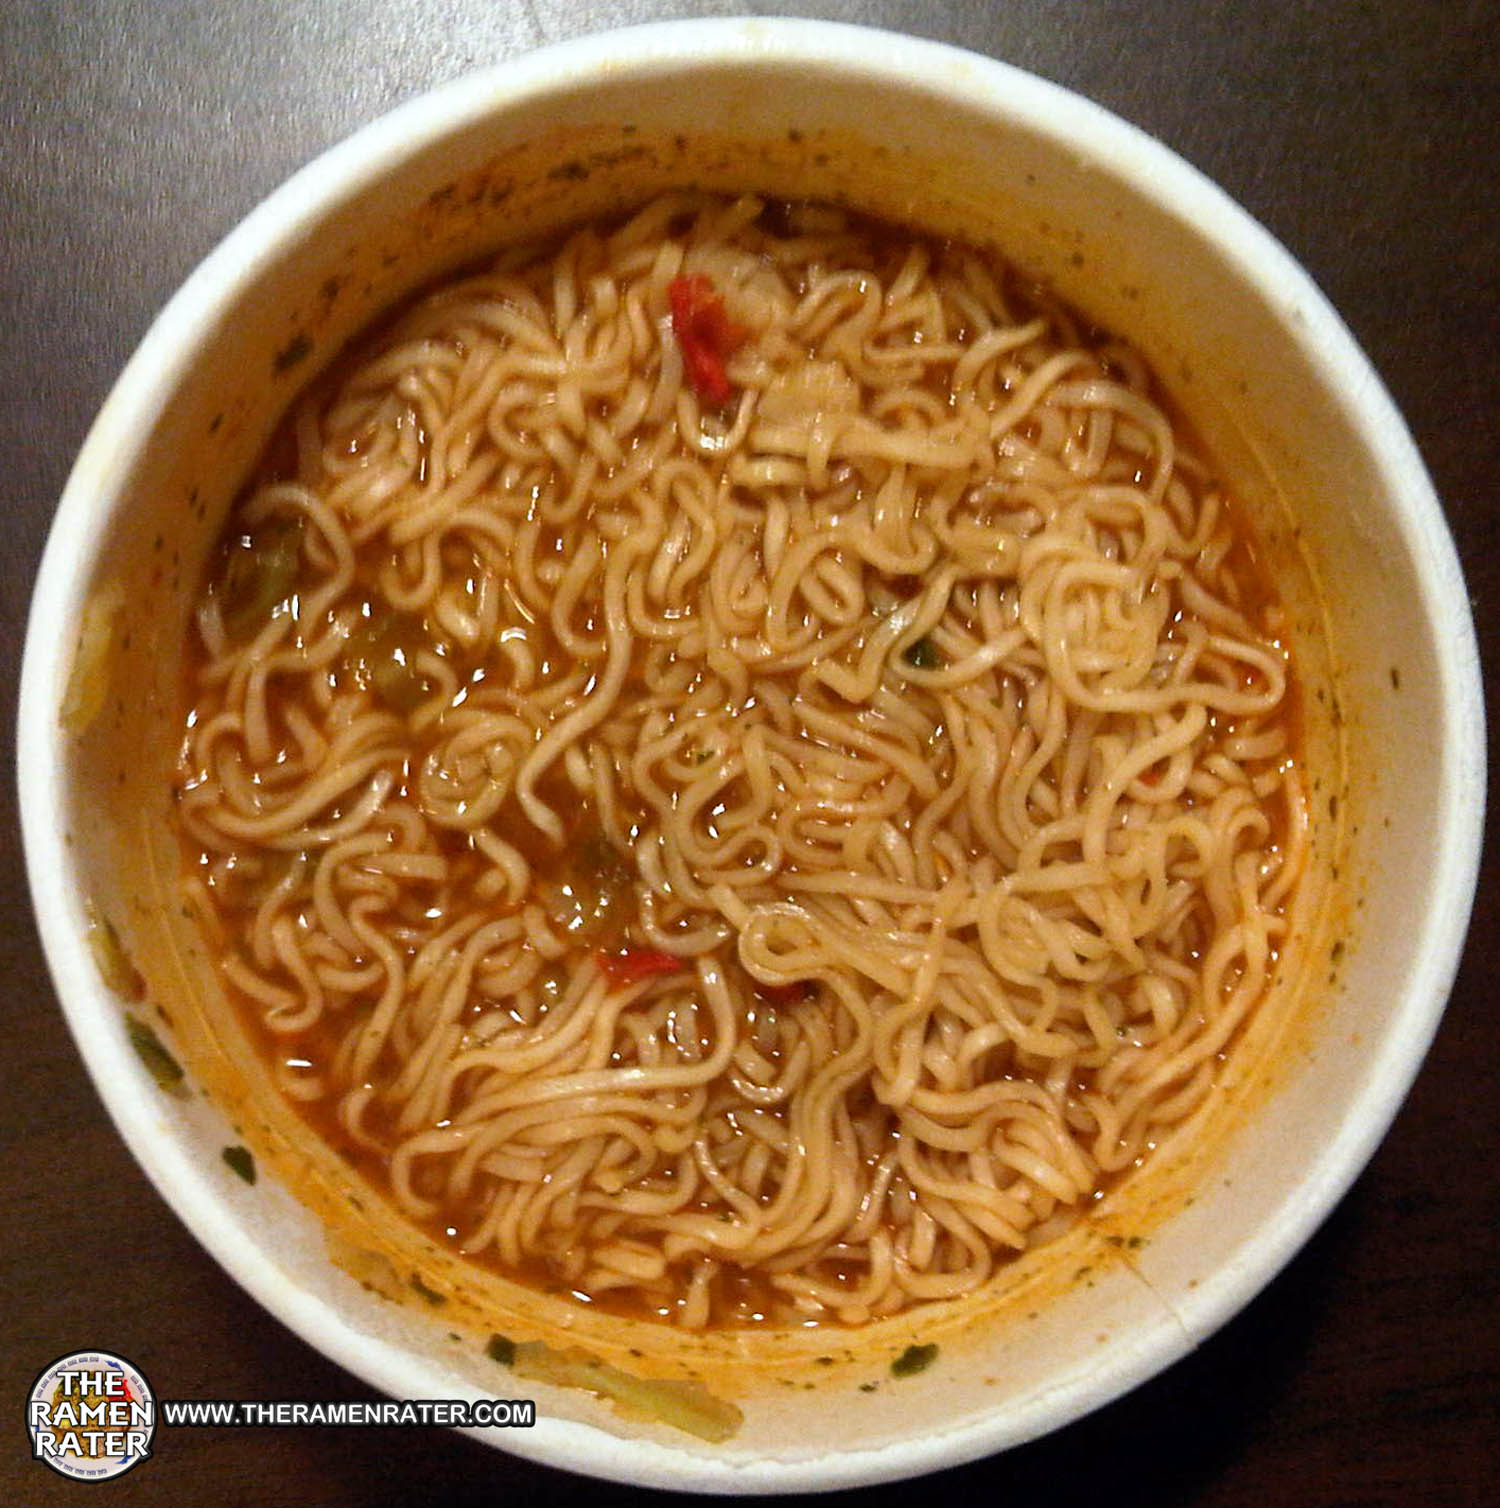 #260: Nissin Bowl Noodles Hot & Spicy With Shrimp - The Ramen Rater